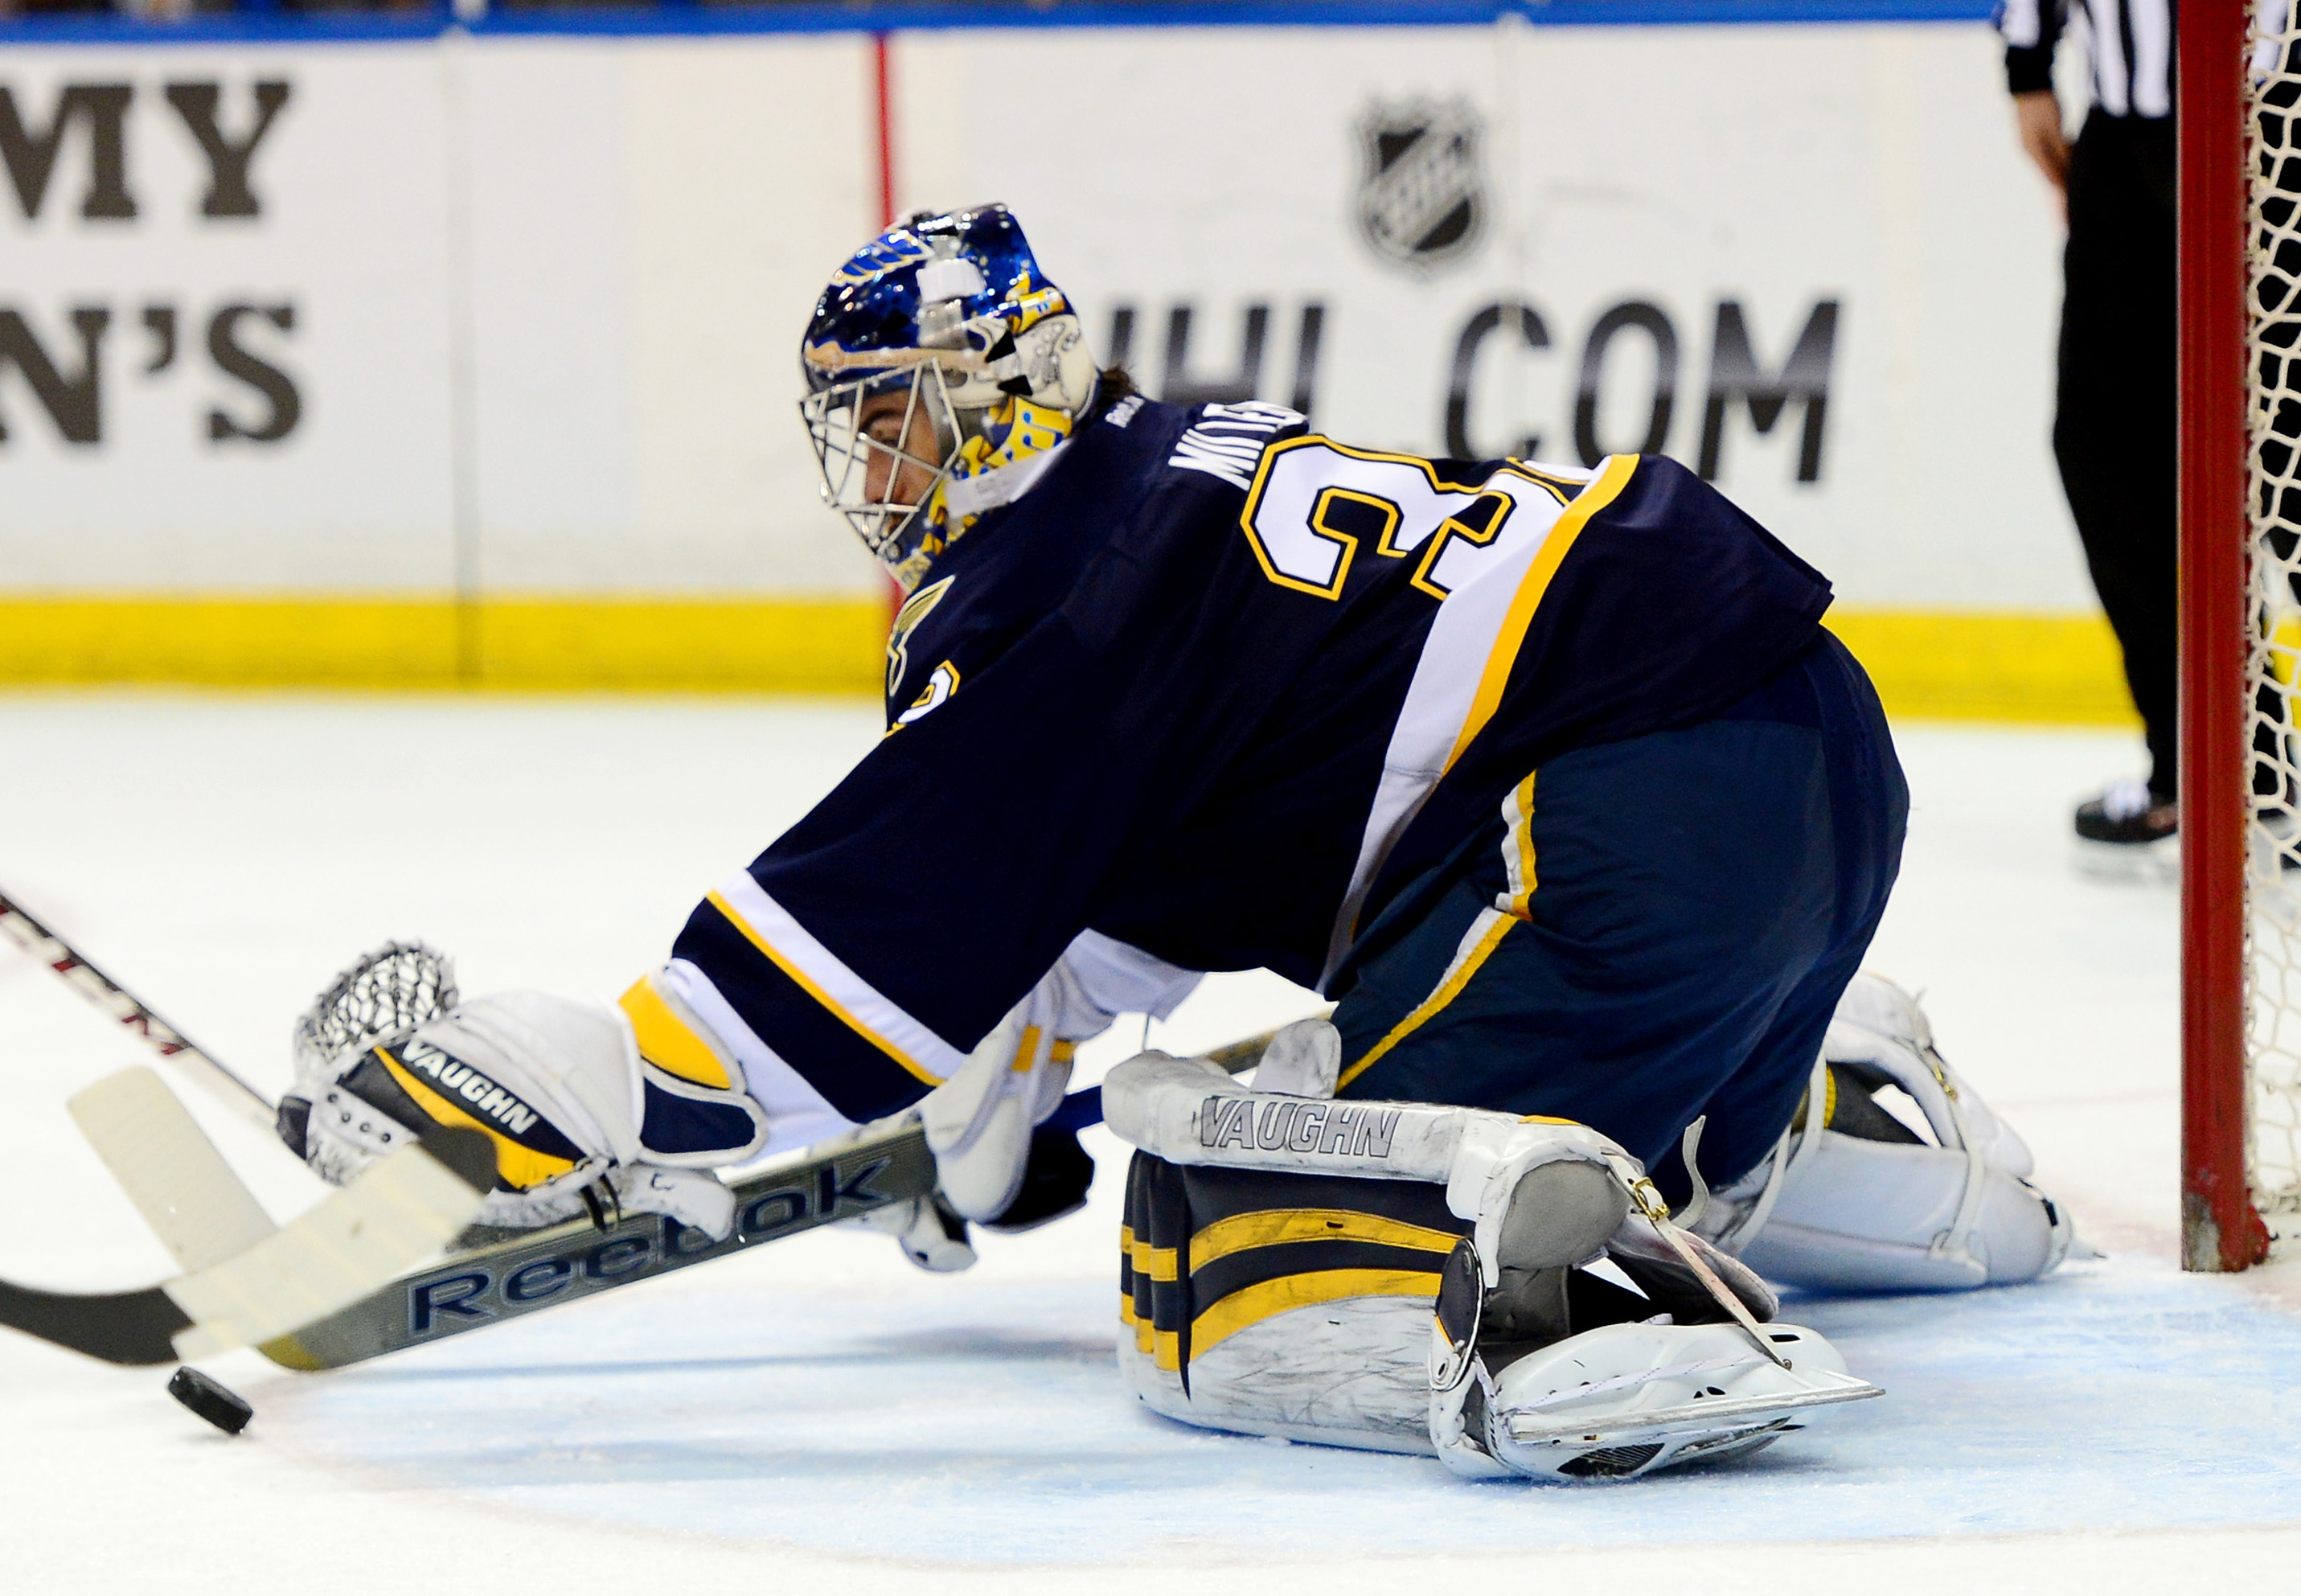 Blues acquire Ryan Miller from Sabres in 5-player deal 